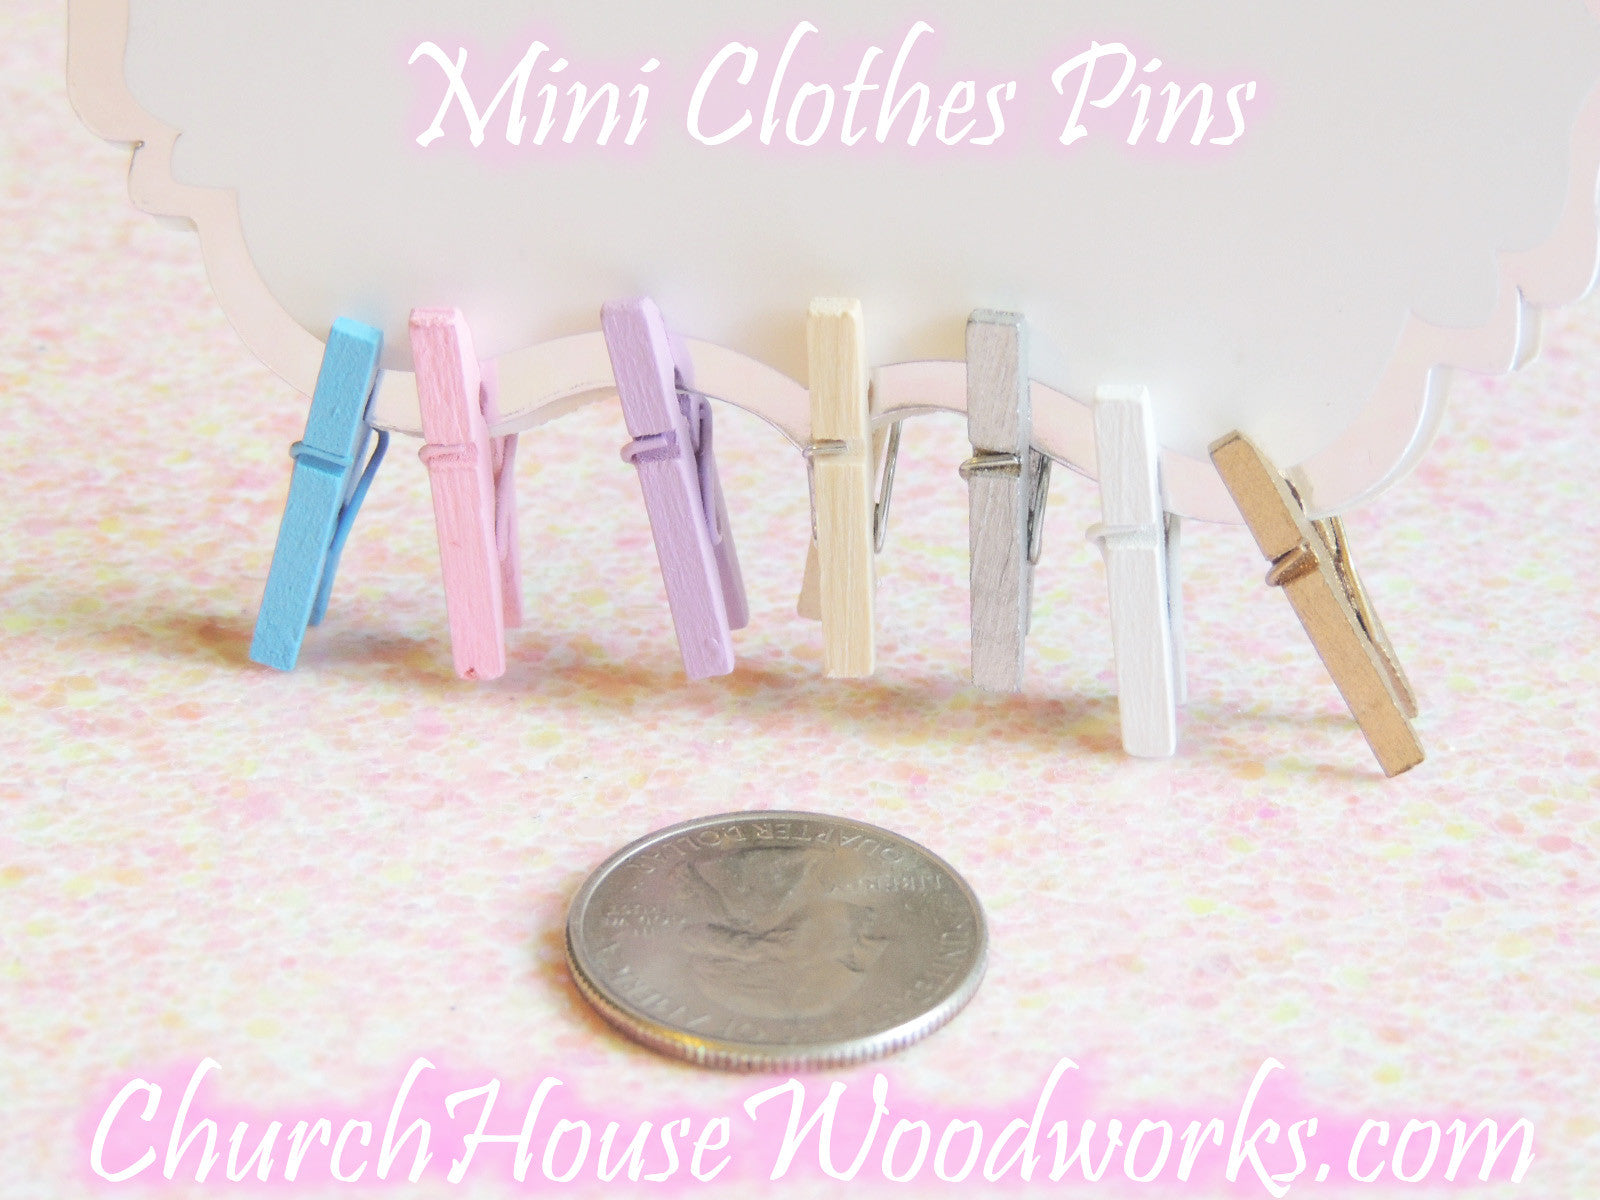 Pack of 100 Mini Silver Clothespins – Church House Woodworks